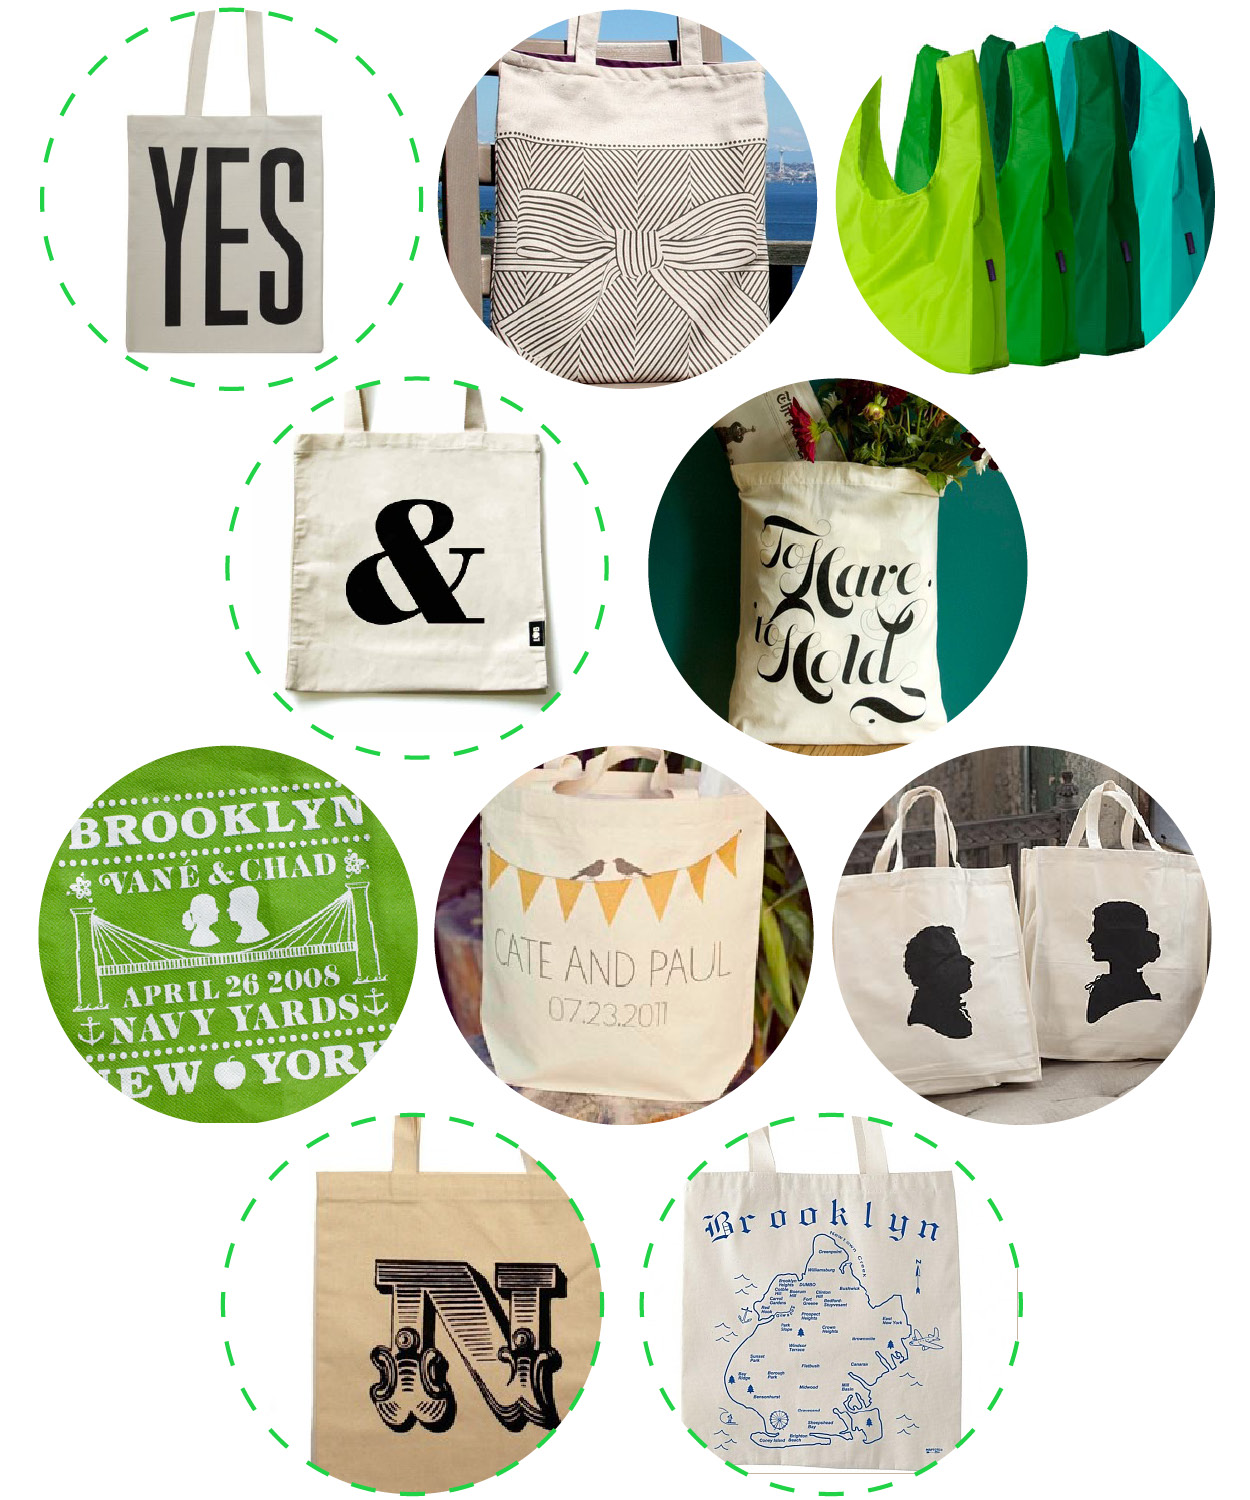 Top 10: Welcome totes